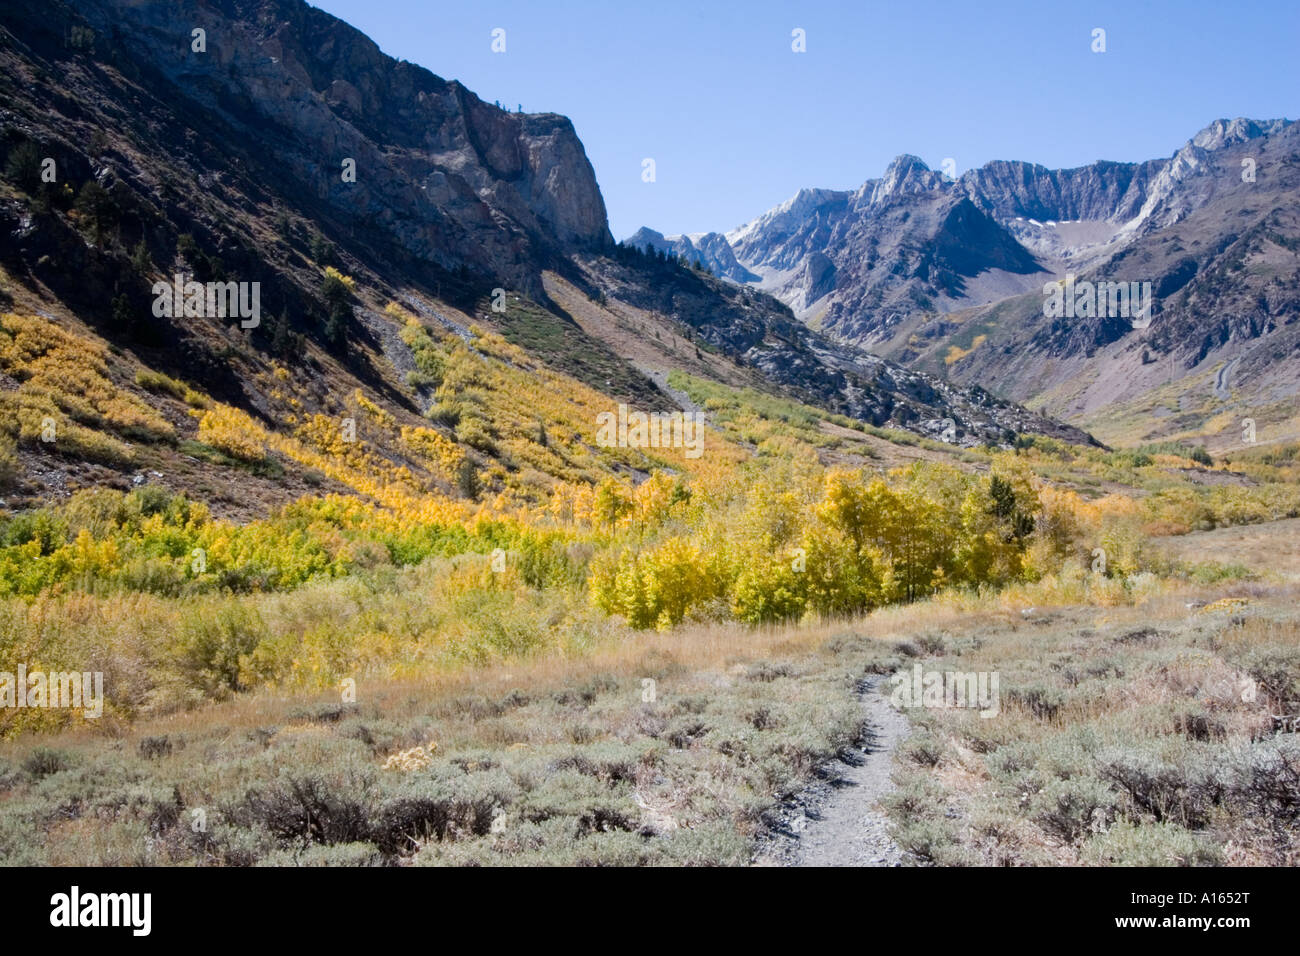 Digital stock image of fall foliage and mountains at McGee Creek Canyon in eastern Sierra Nevada mountains Stock Photo